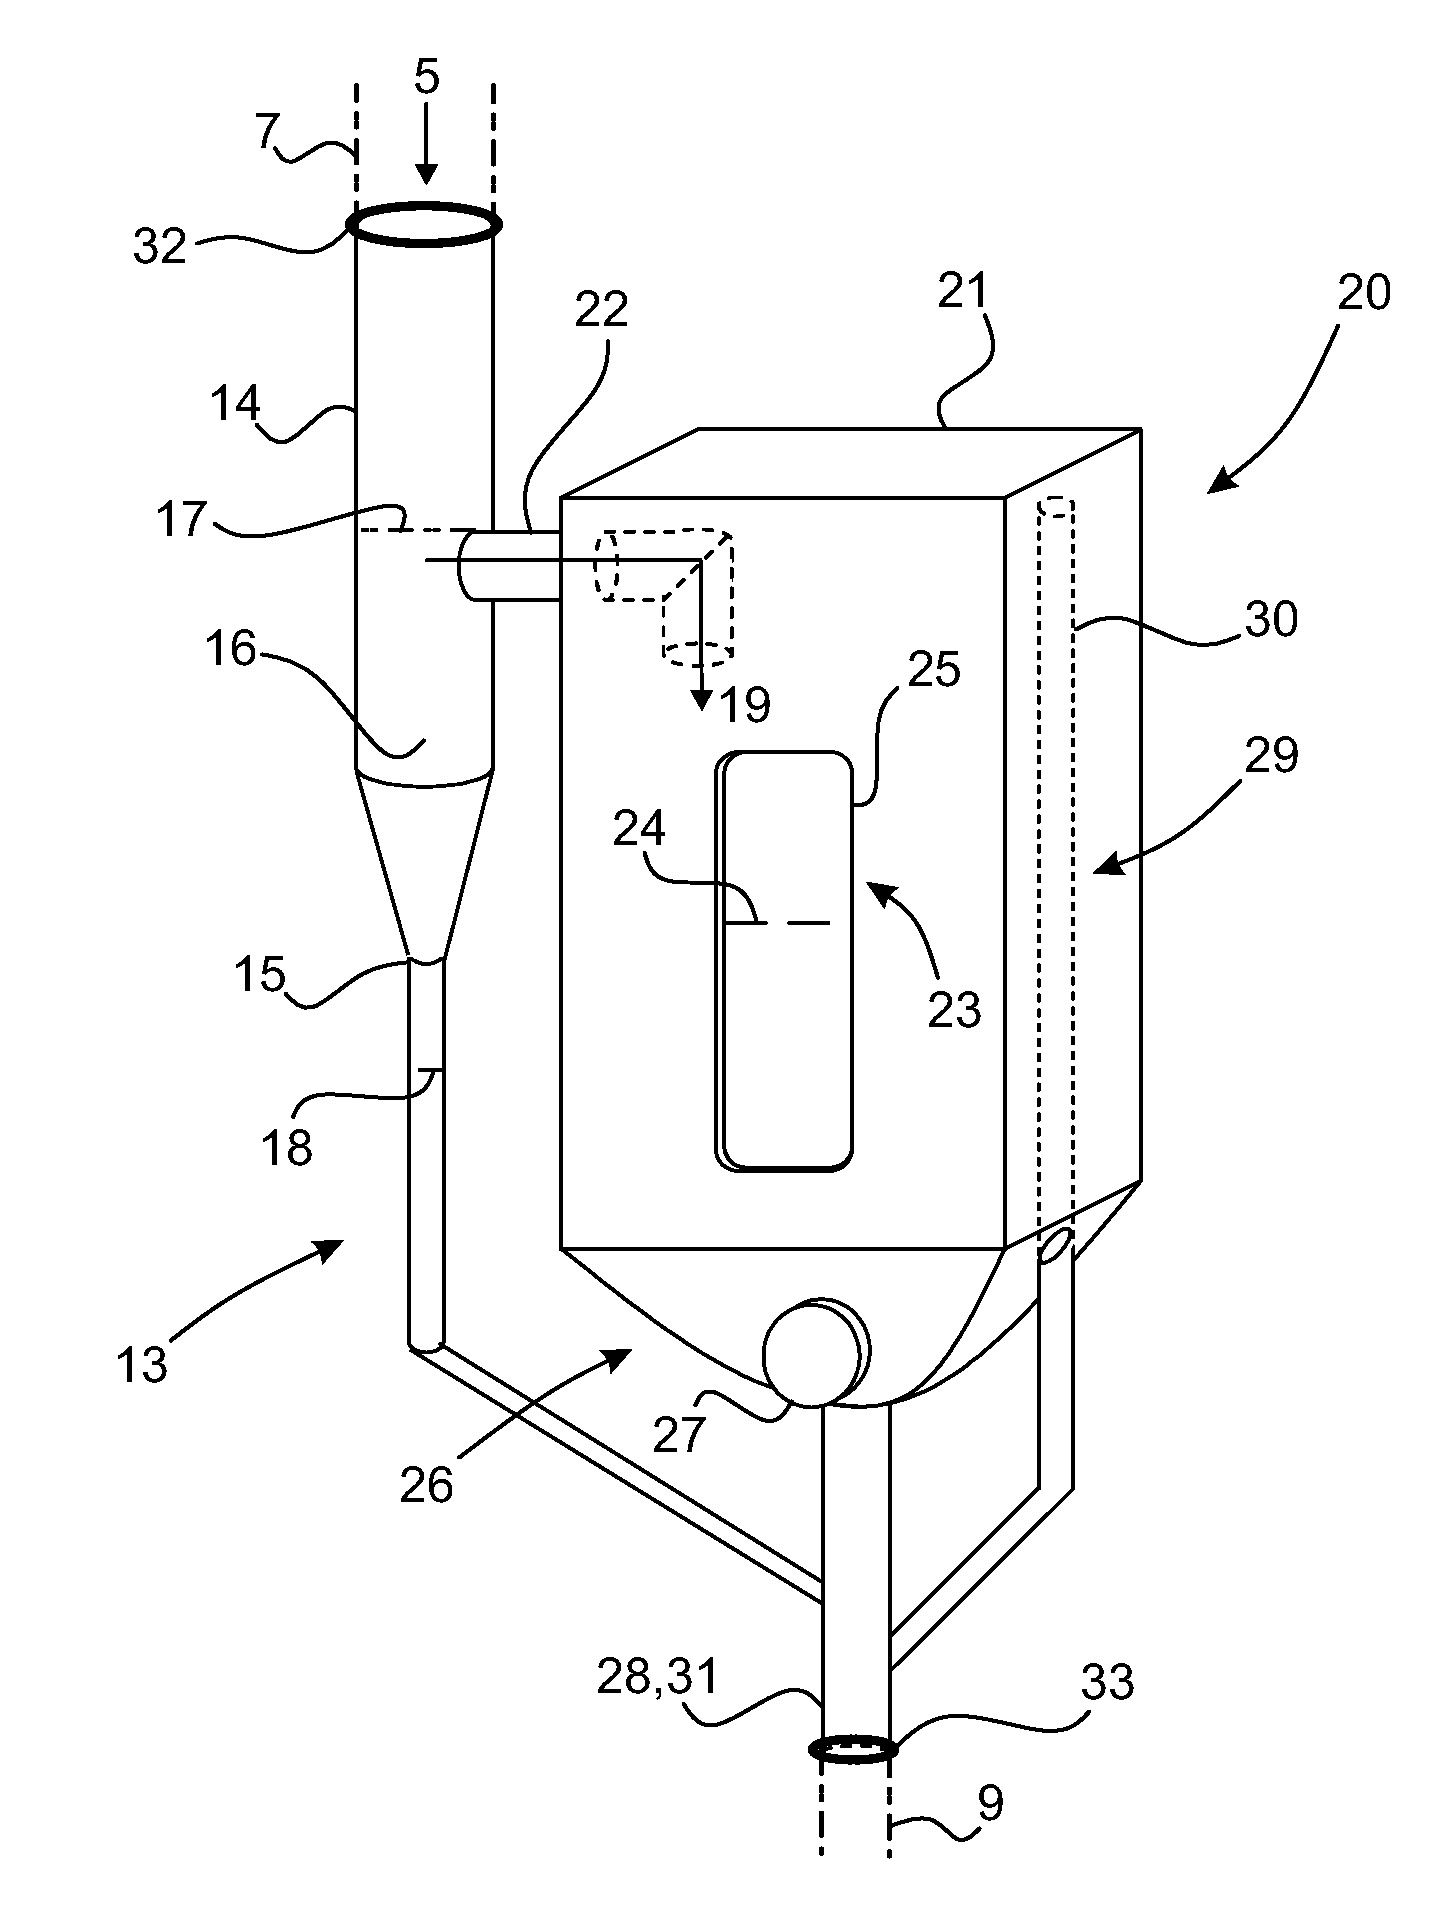 Drainage circuit for draining liquid coming from a power plant of a rotorcraft, the circuit incorporating an appliance for monitoring an excessive flow of the liquid